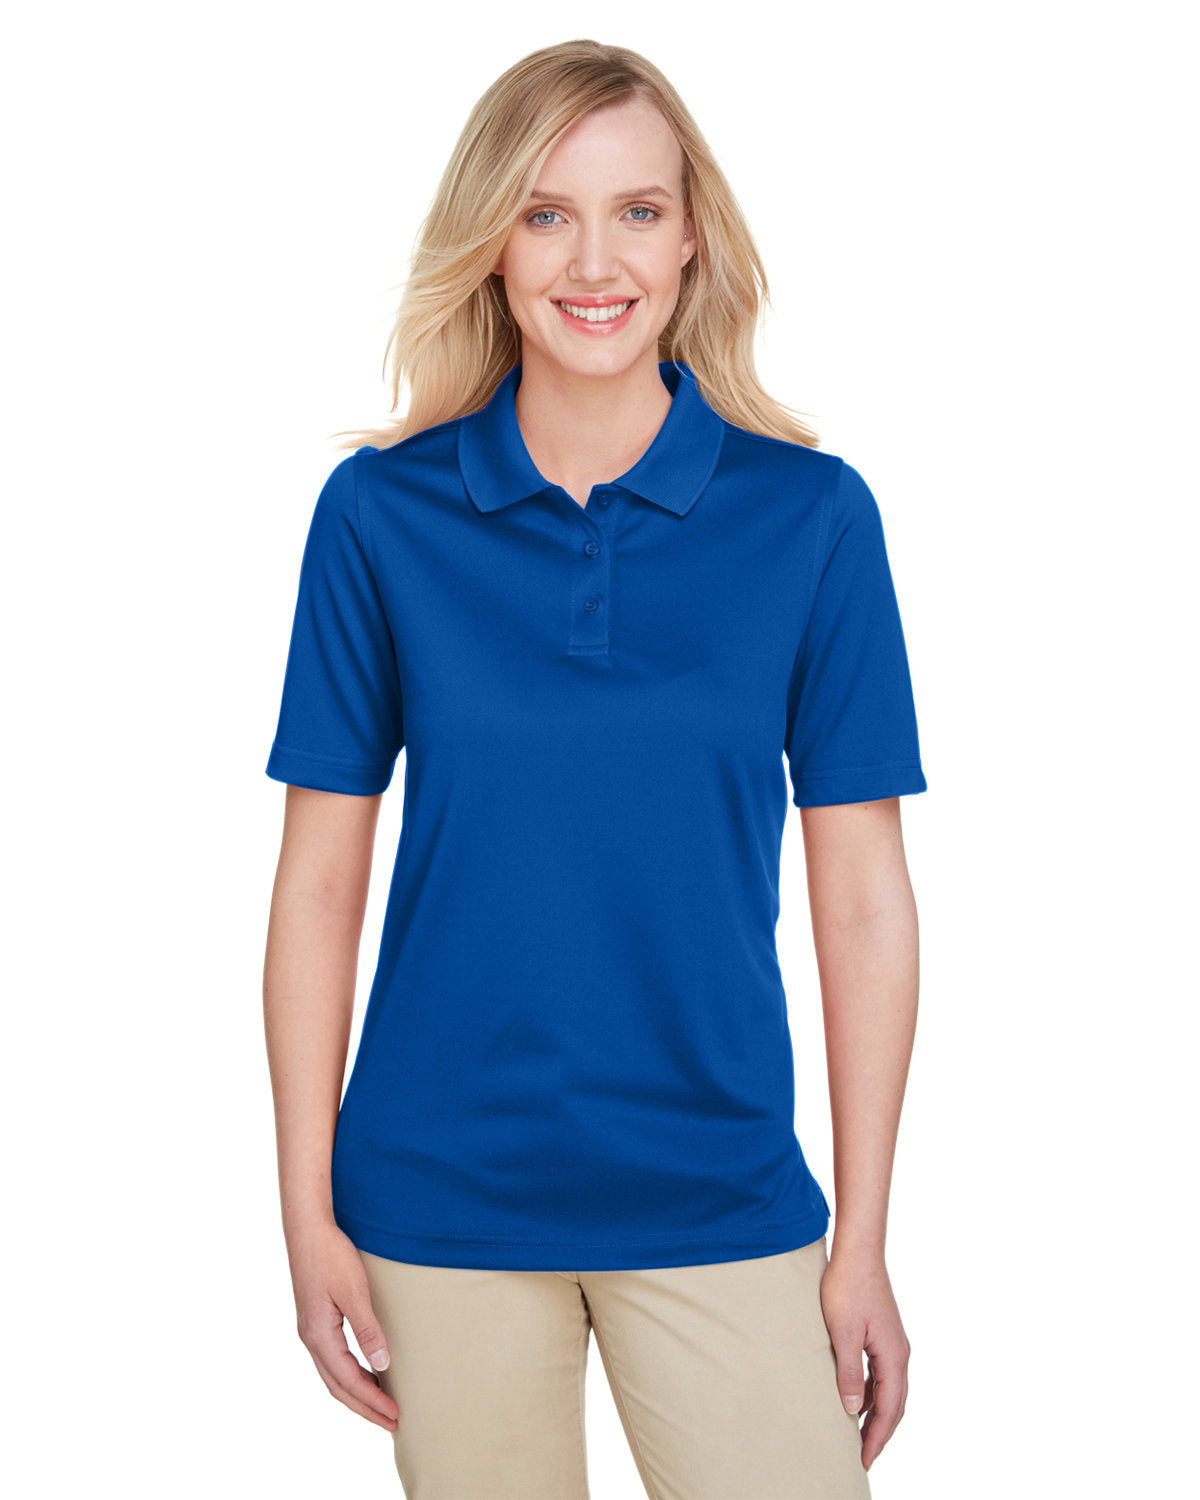 Ladies Protection Plus, Performance Polos (embroidered) - Antimicrobial - BRNDURNAME